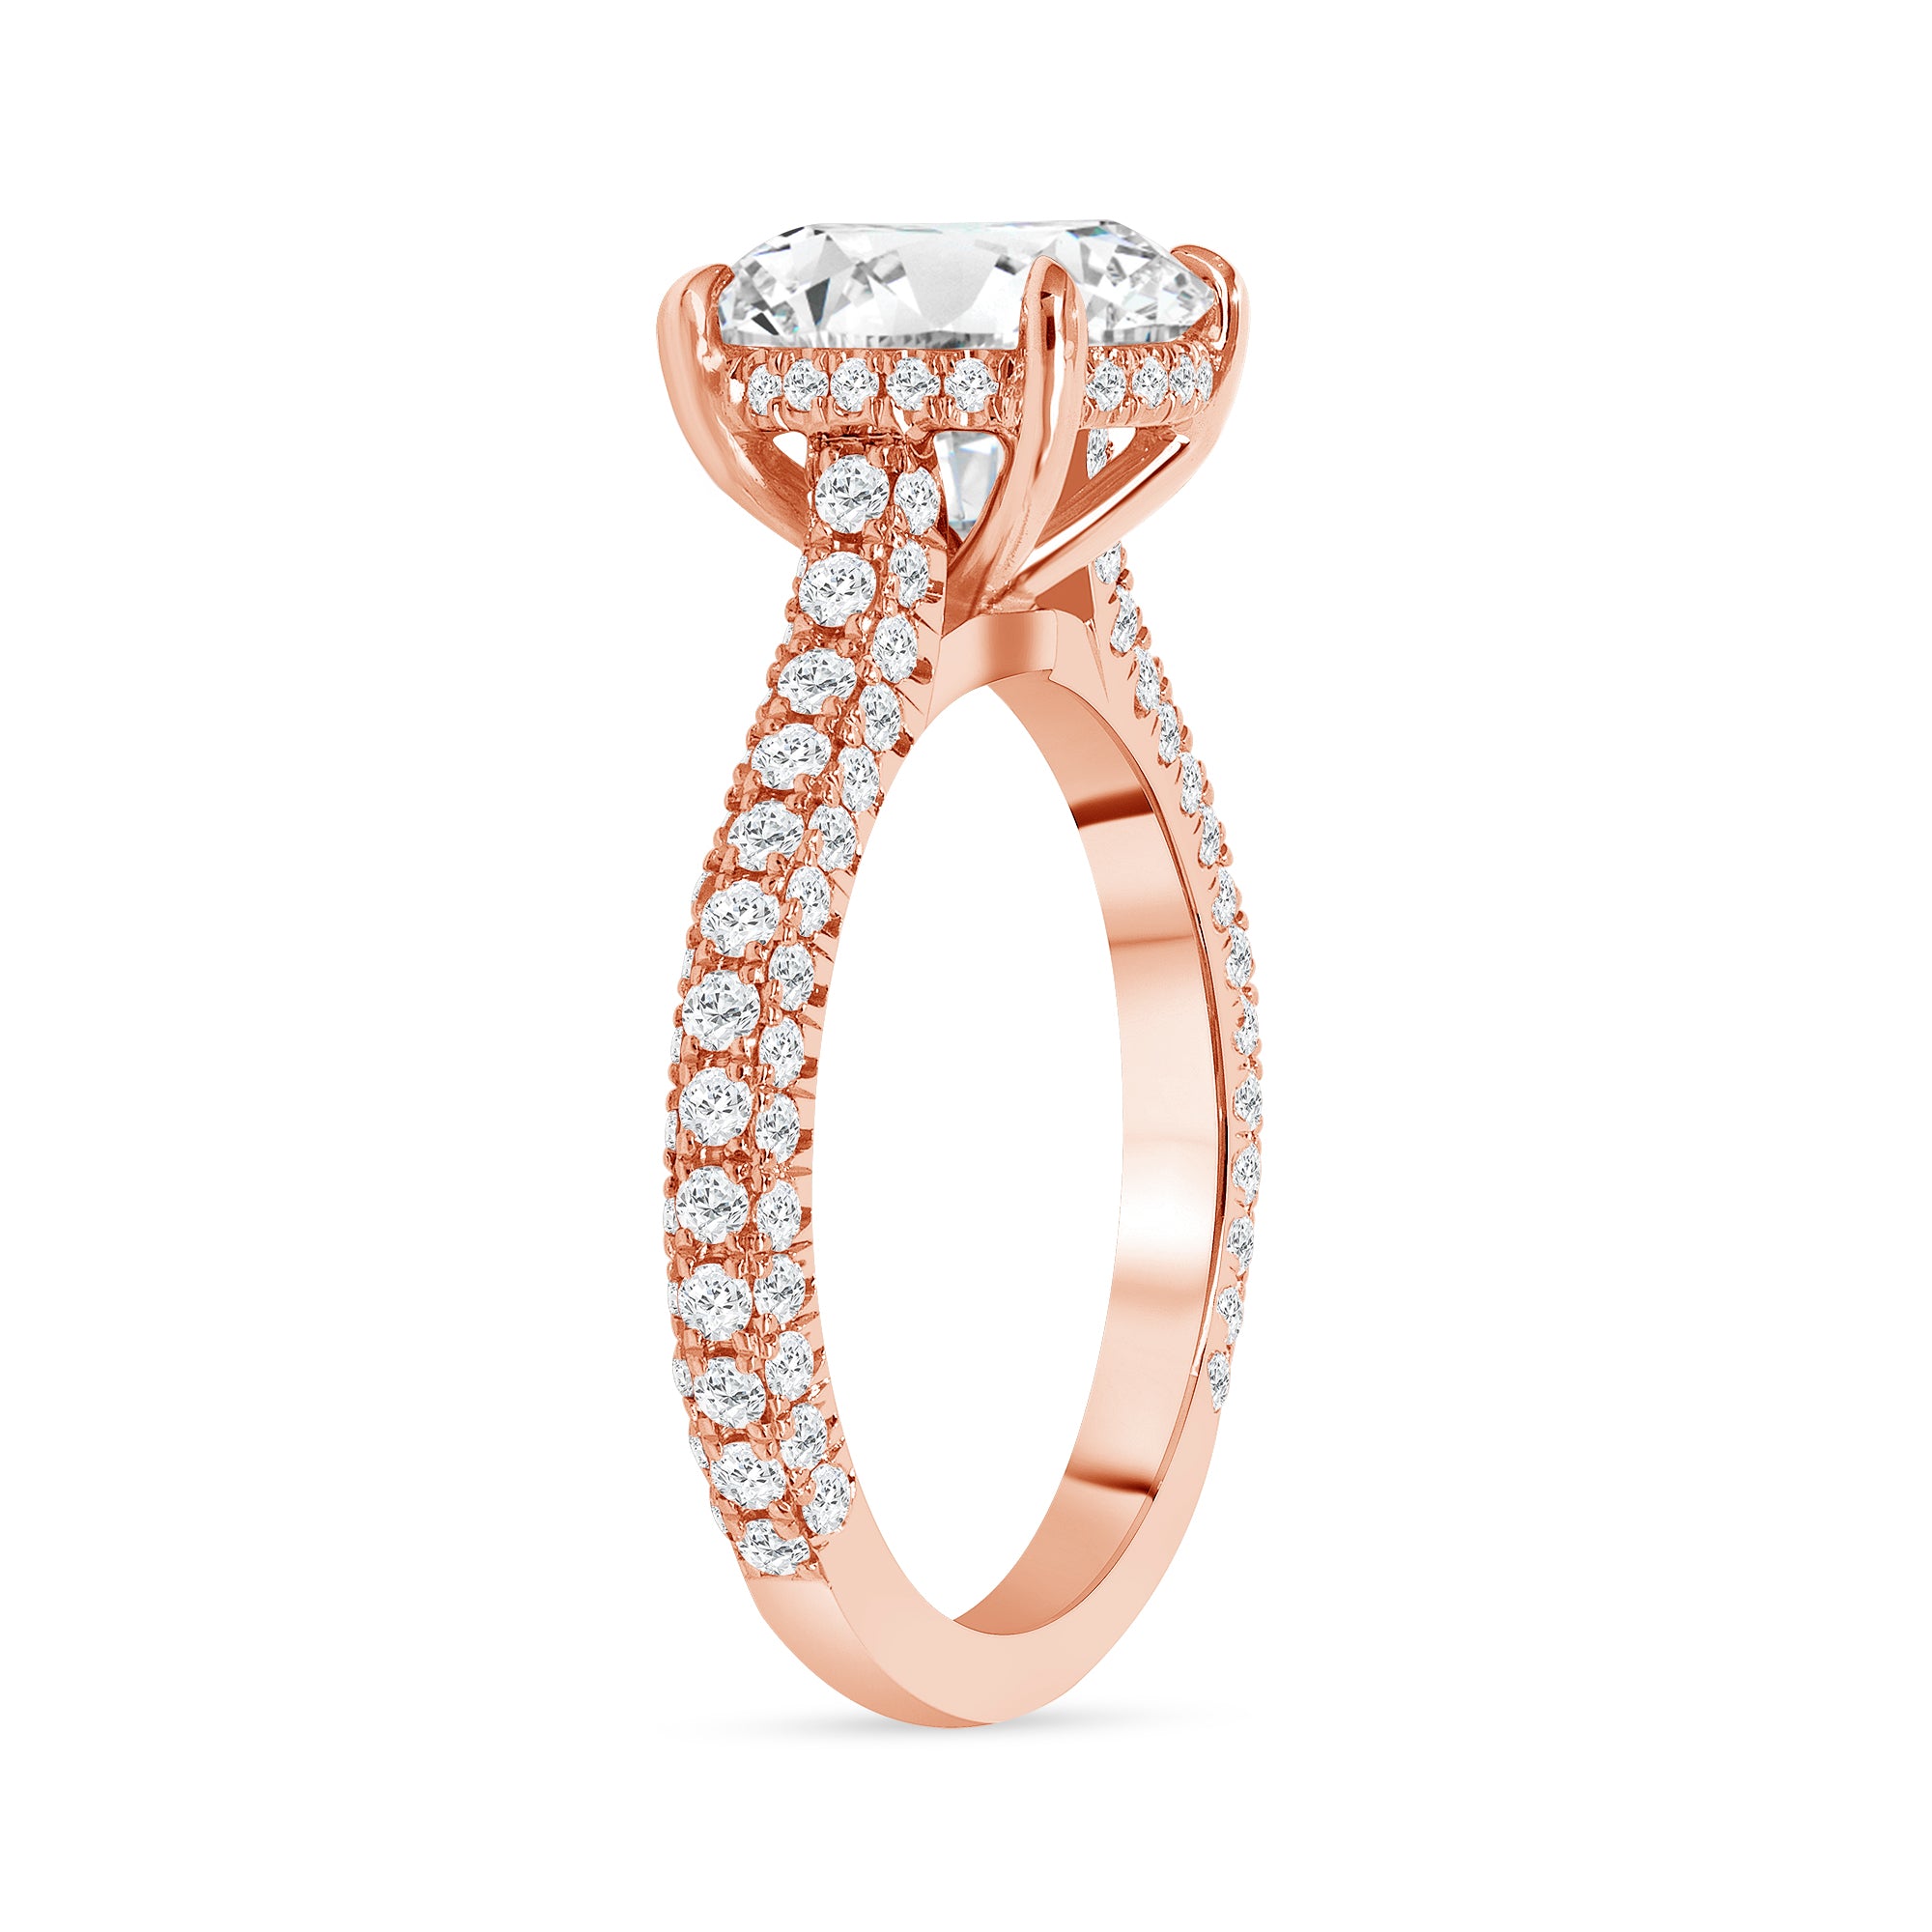 2.5ct Round Brilliant Cut Diamond Engagement Ring in 14k Rose Gold Band, GIA Certified